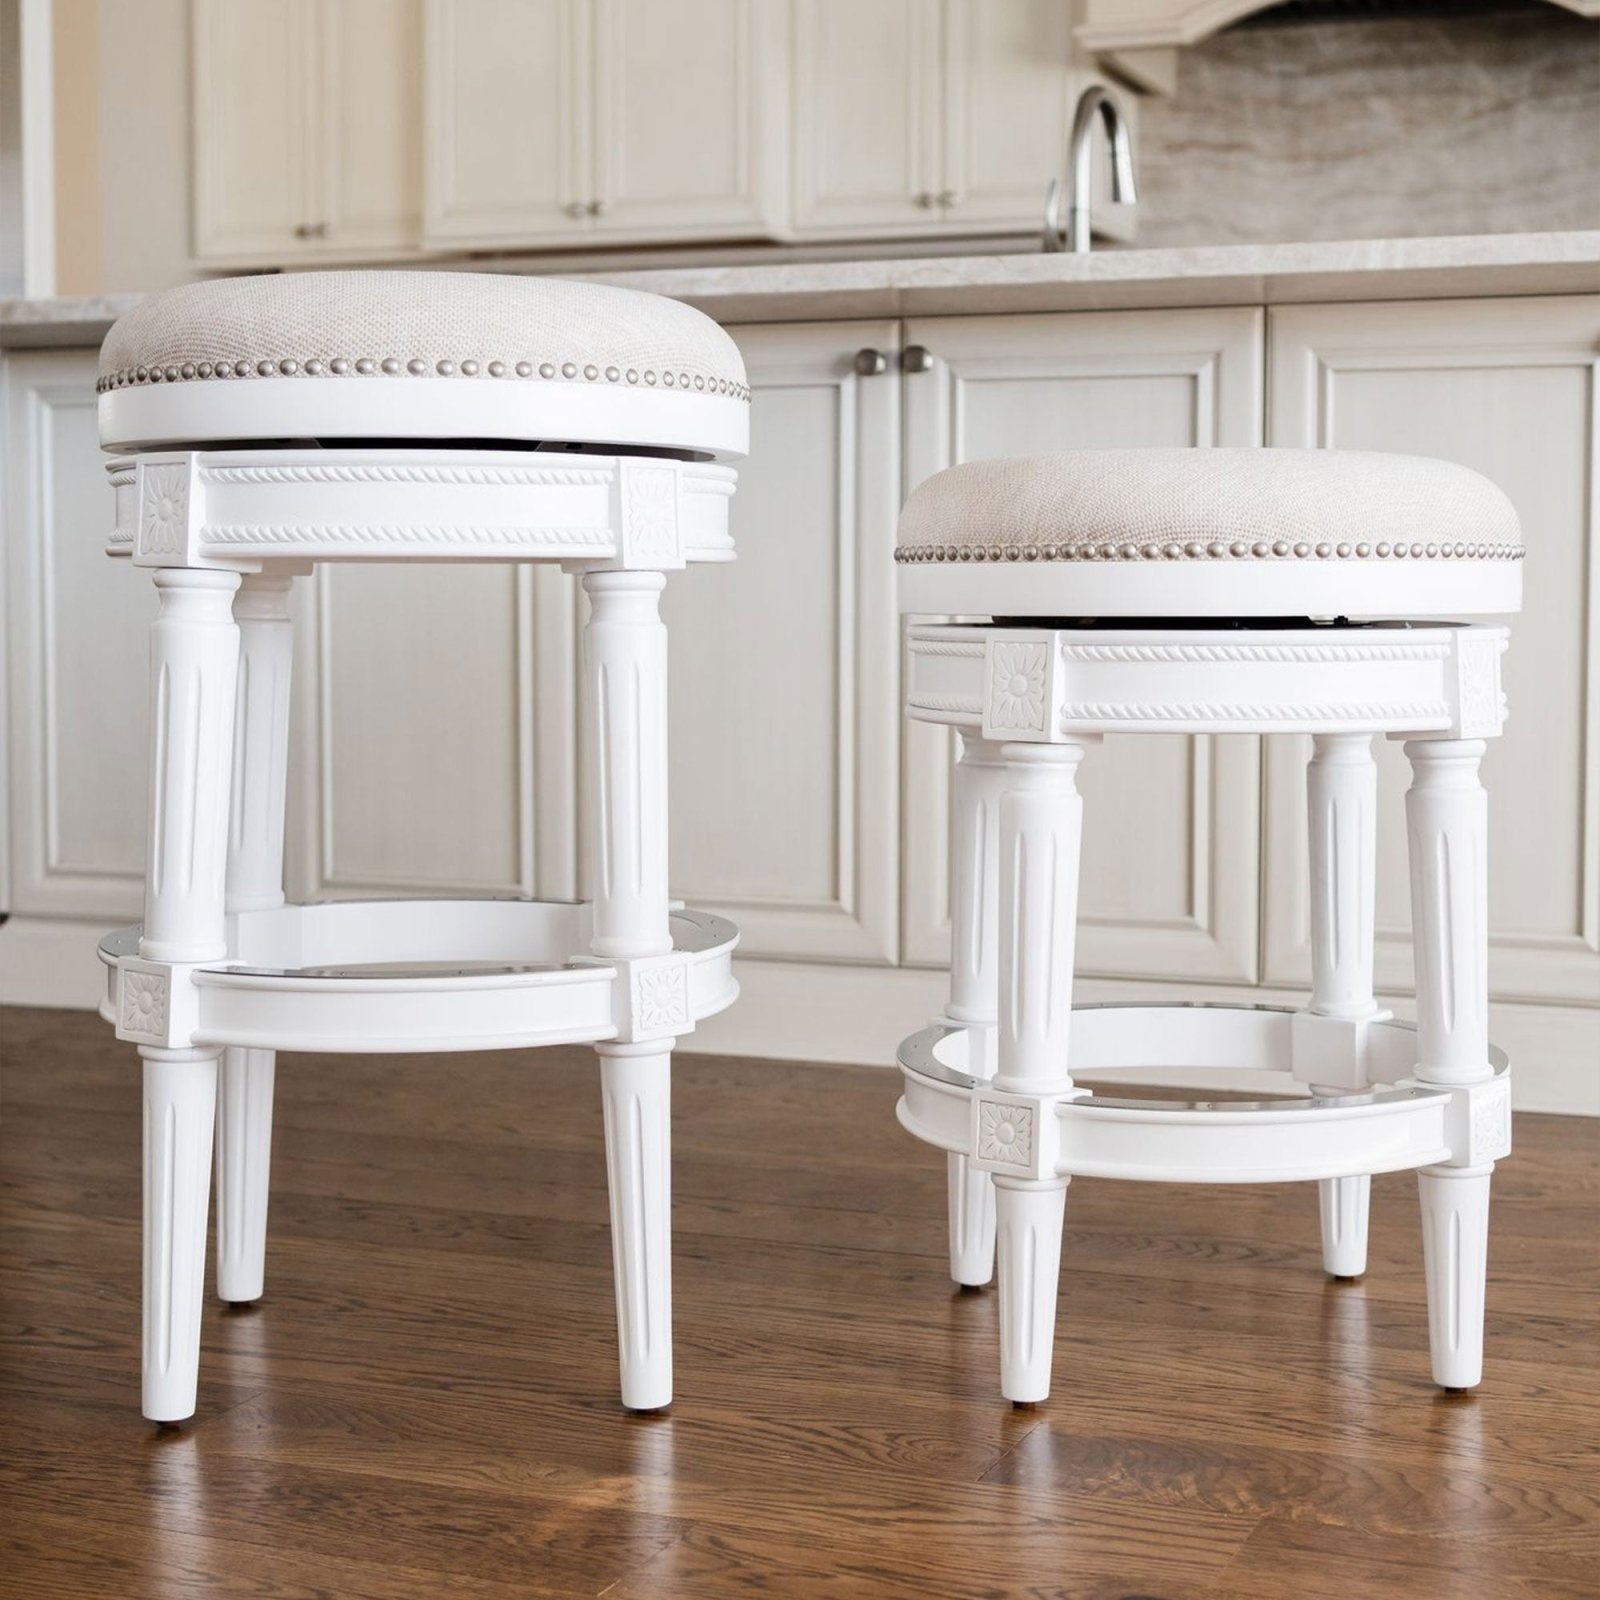 Pullman Backless Bar Stool in Alabaster White Finish with Cream Fabric Upholstery in Stools by Maven Lane